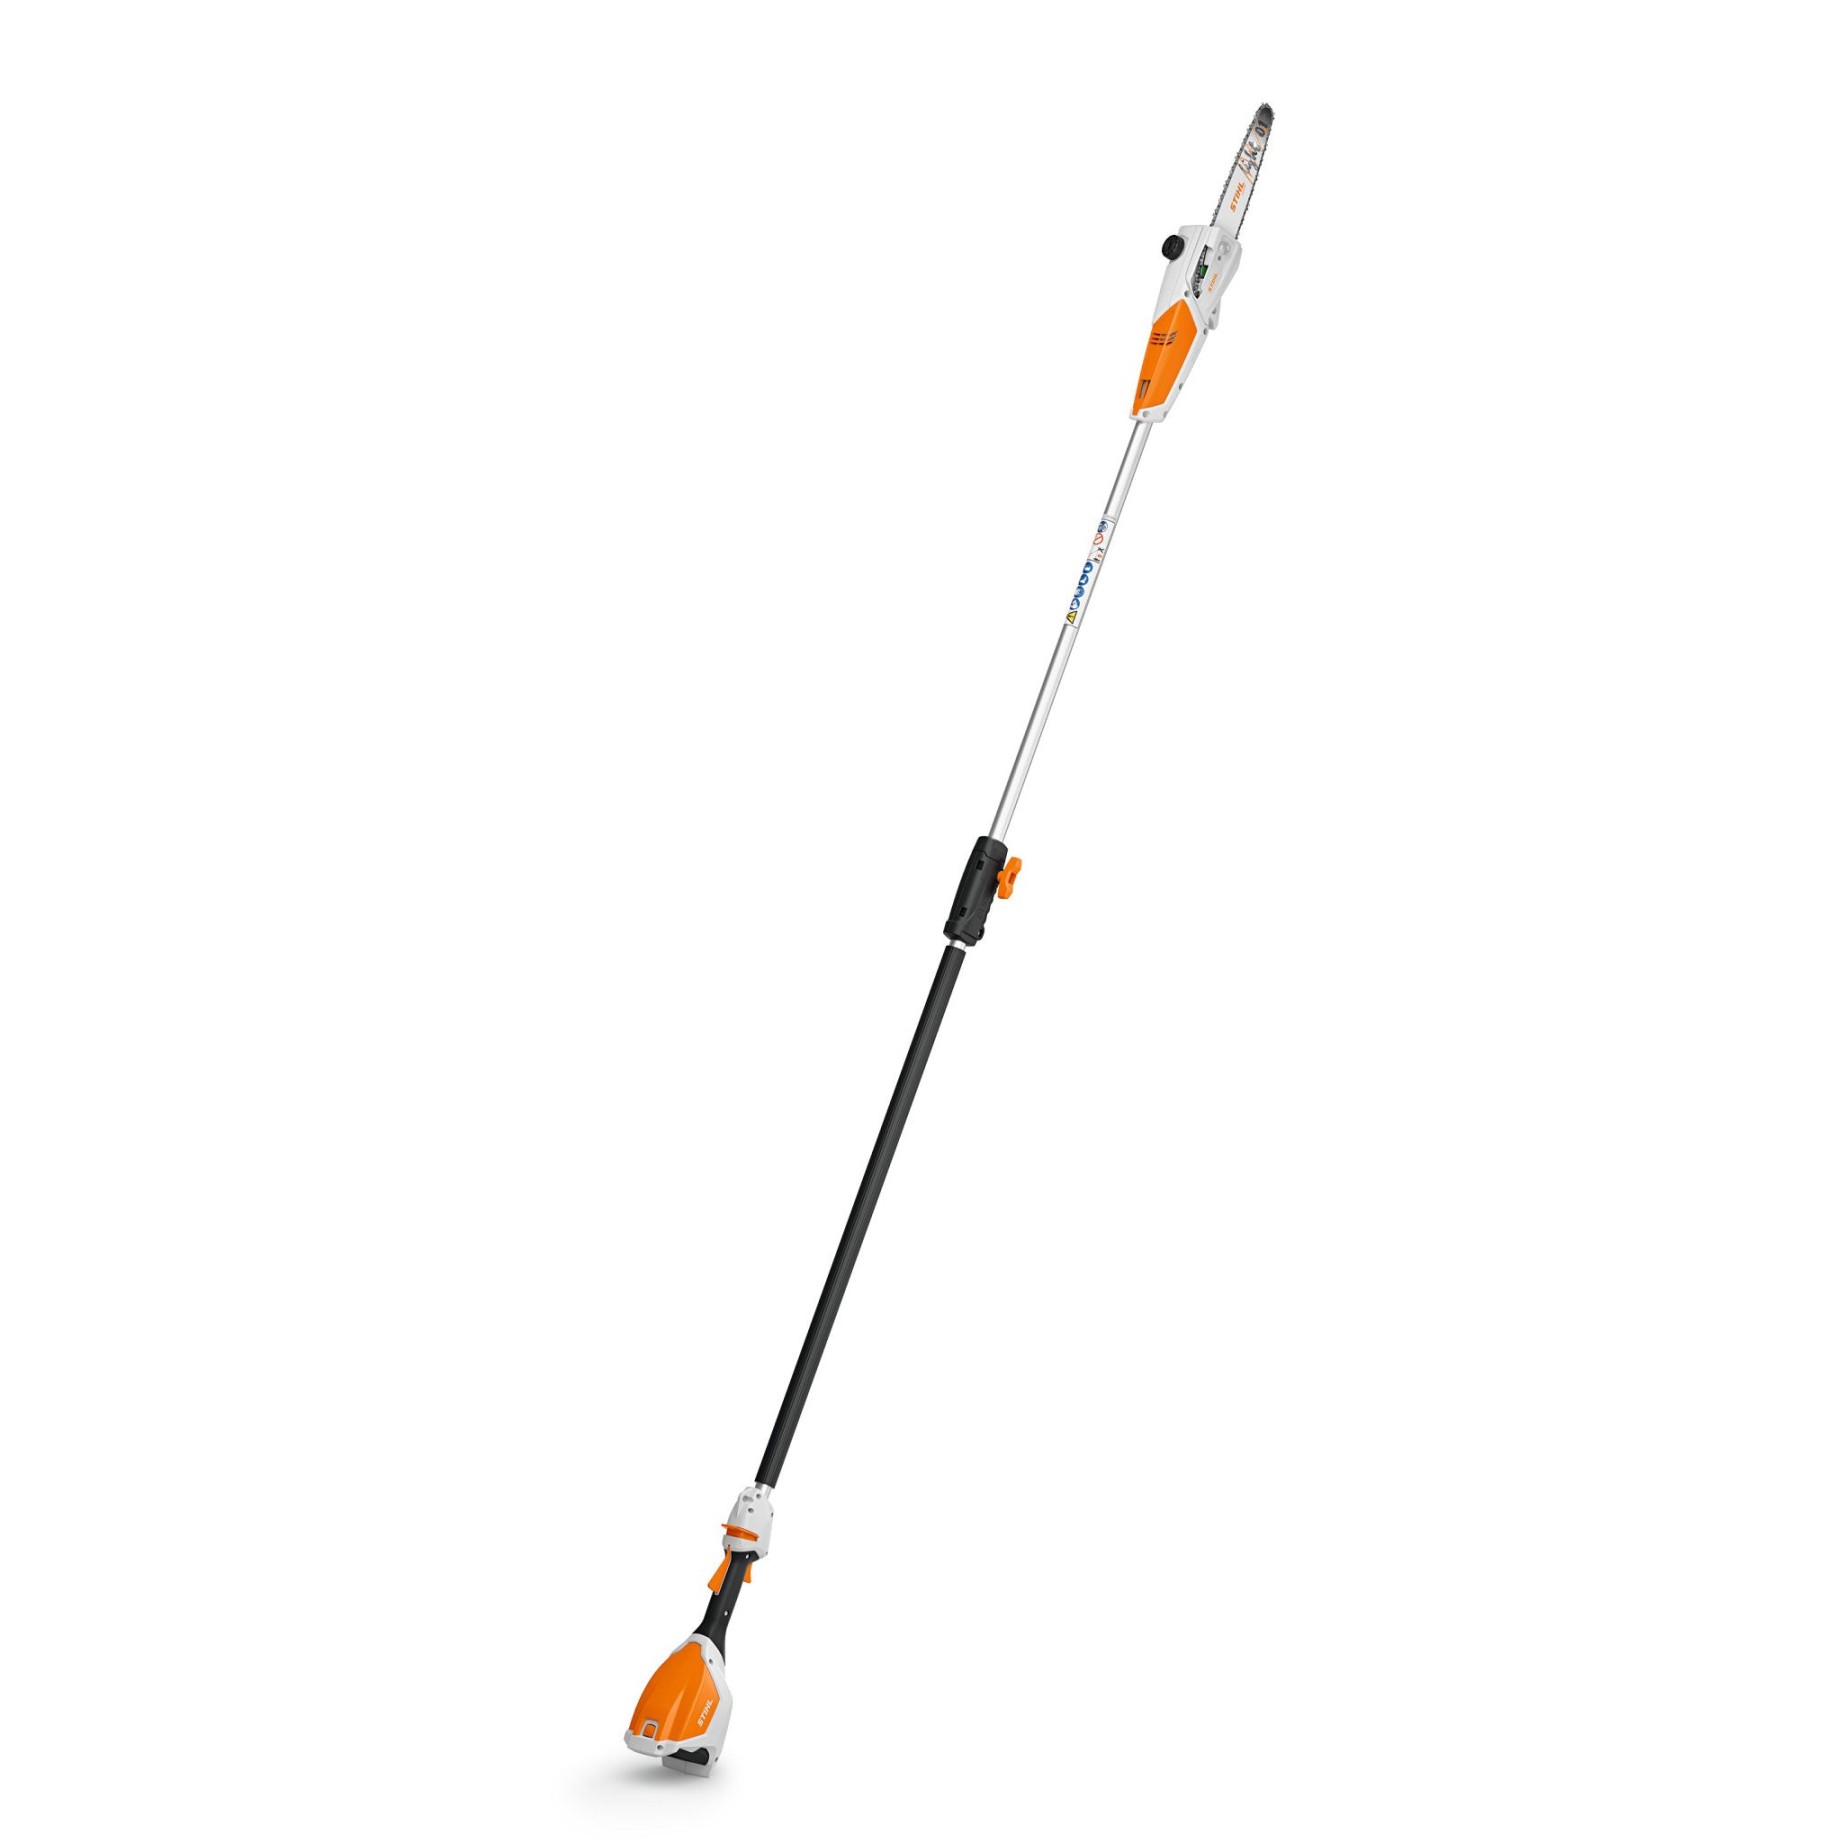 hta-battery-powered-pole-pruner Stihl Battery Pole Saw Review picture